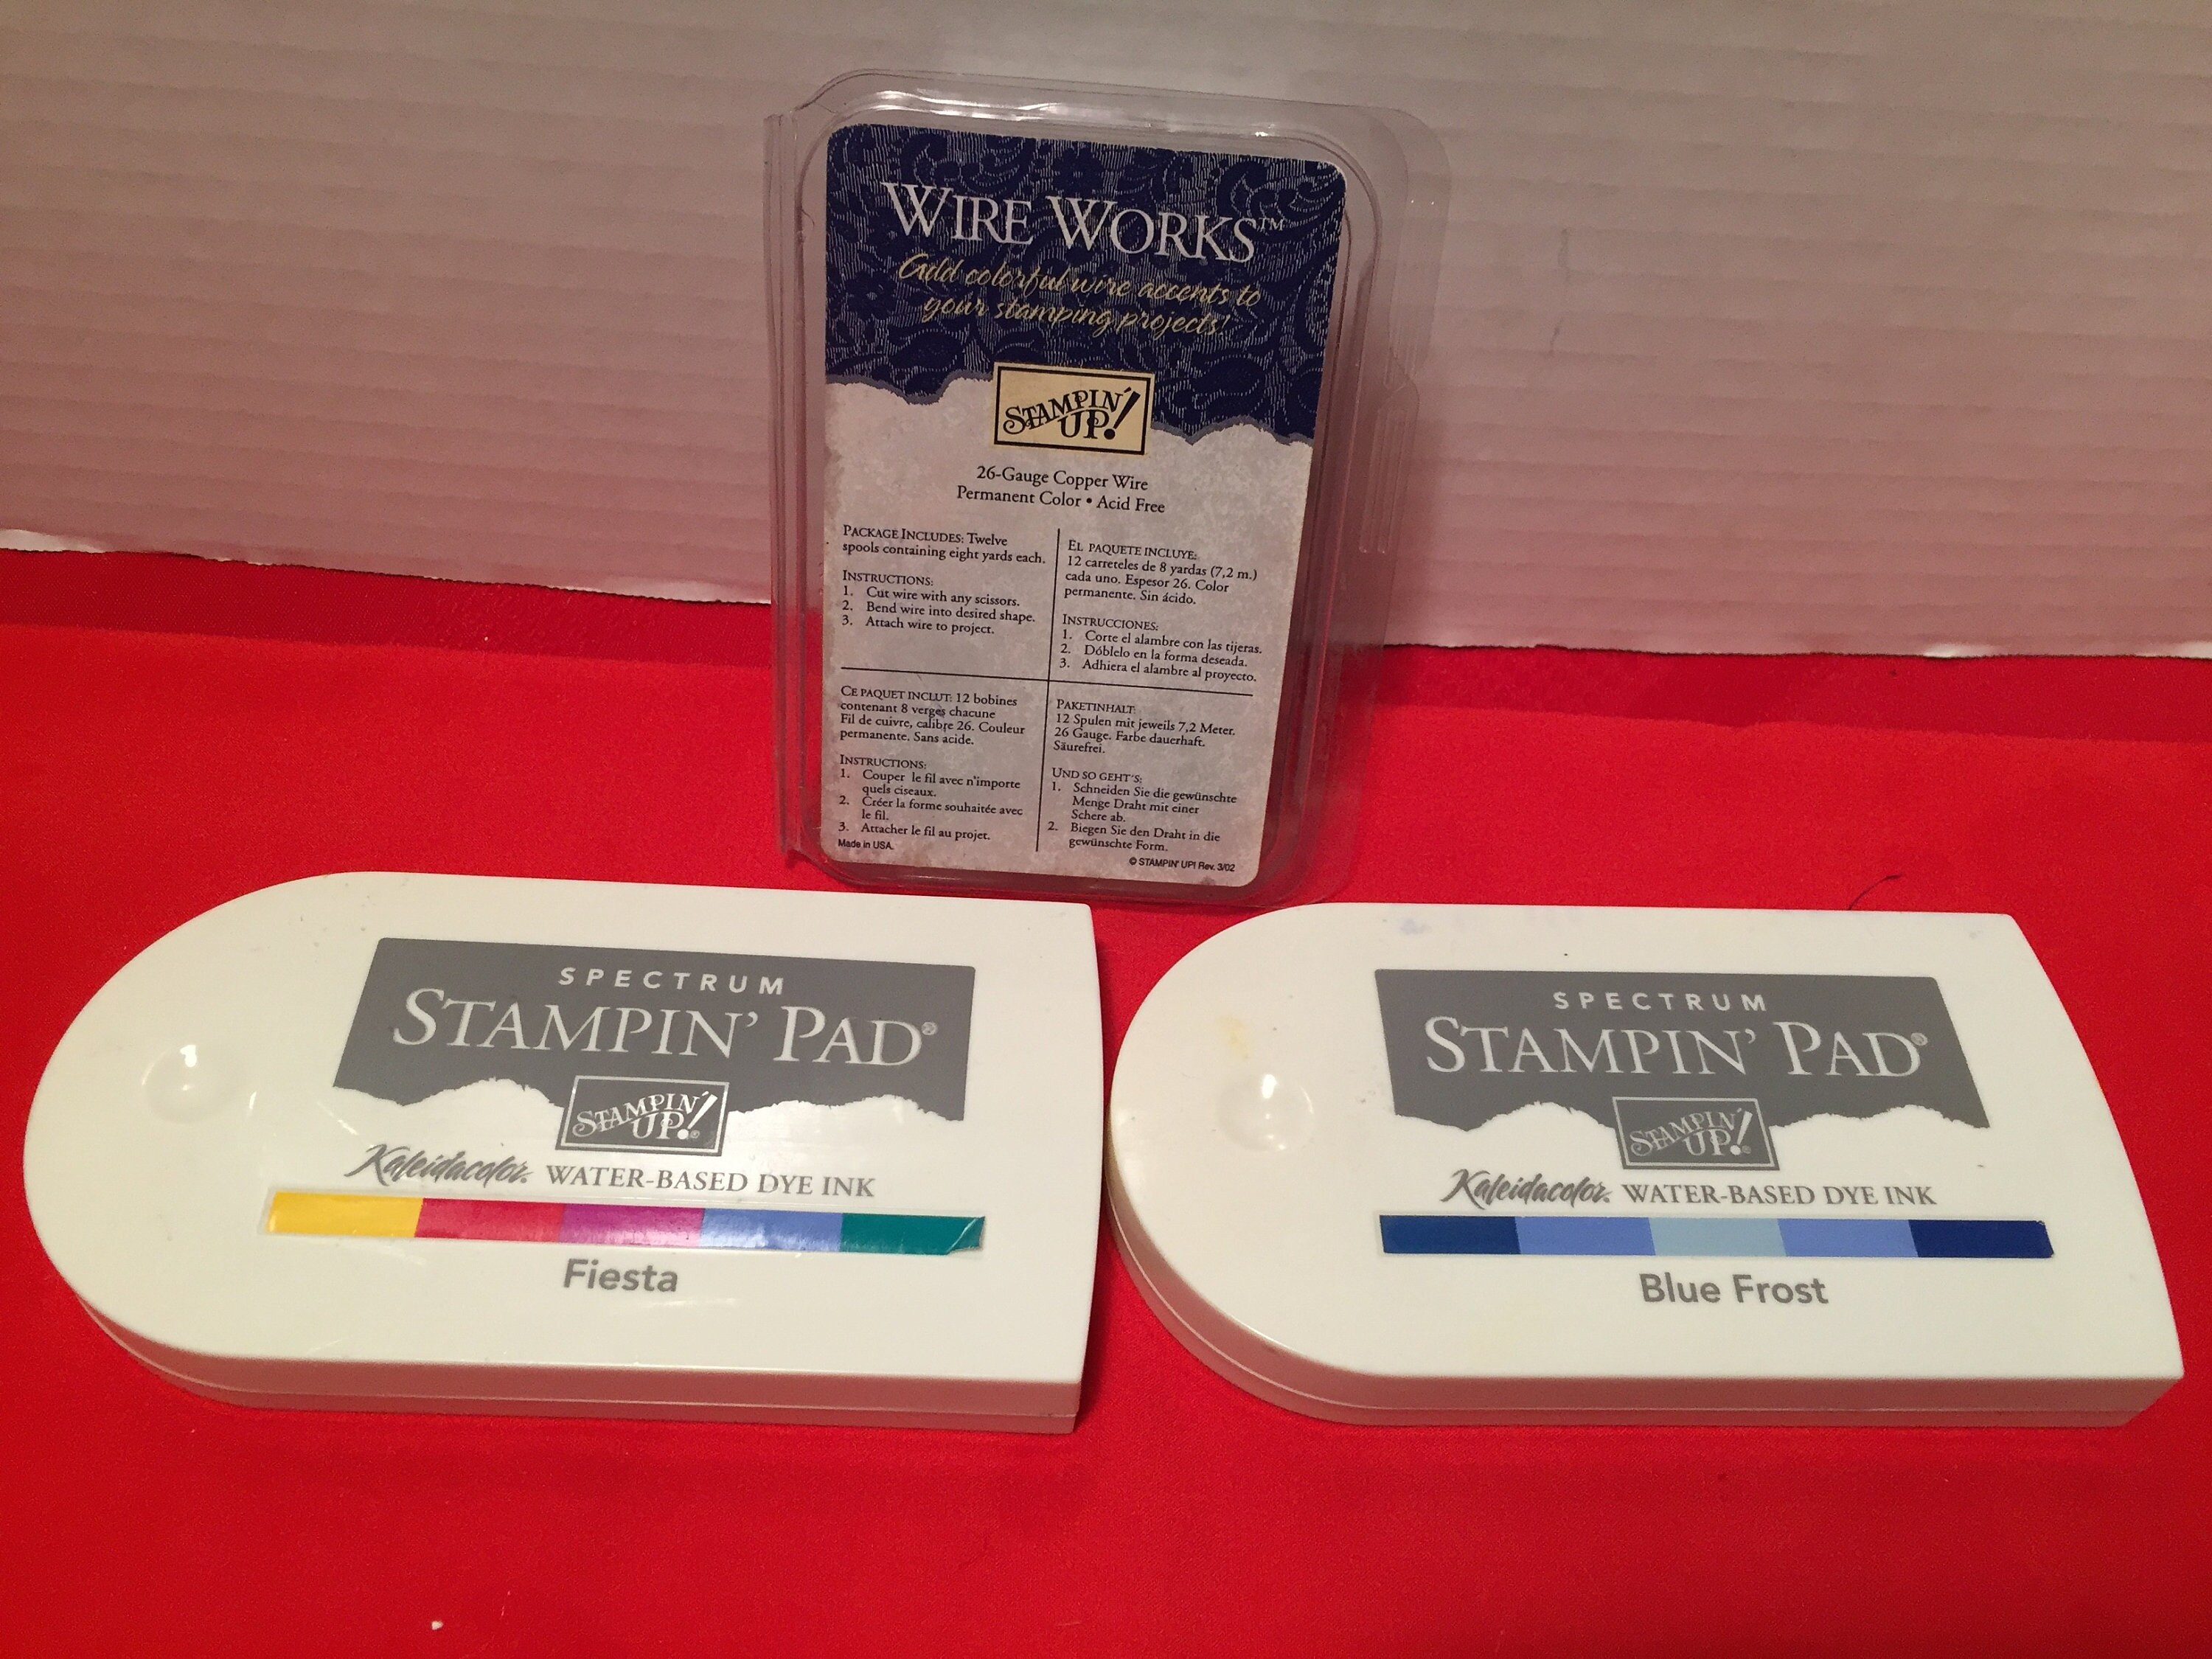 Stampin Up Spectrum Ink Pad Blue Frost Kaleidacolor water based